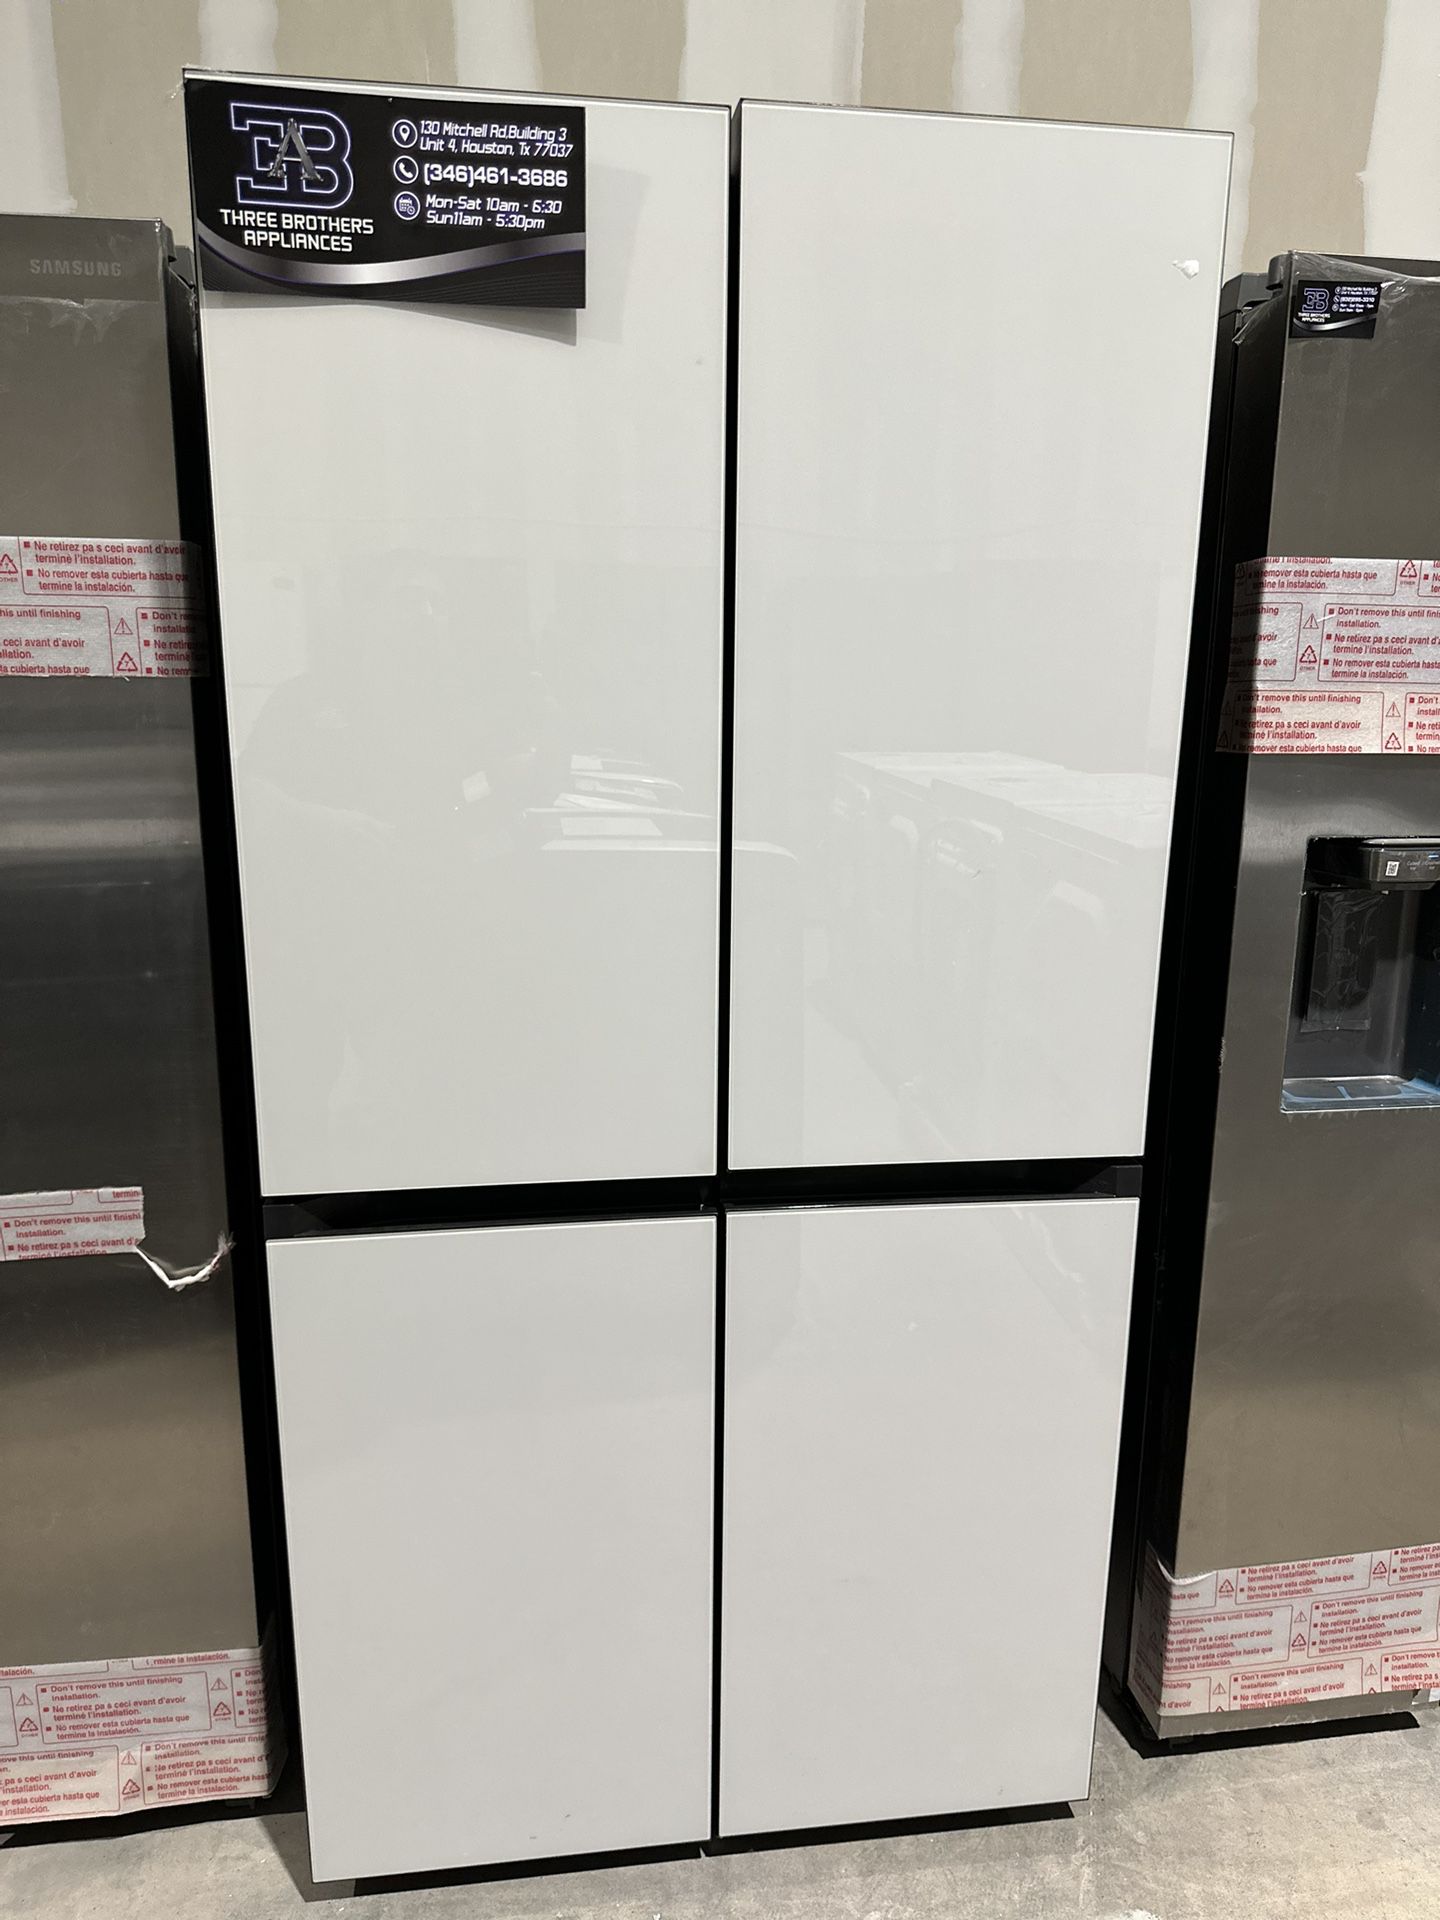 Affordable Prices On All Refrigerators!!!!!!